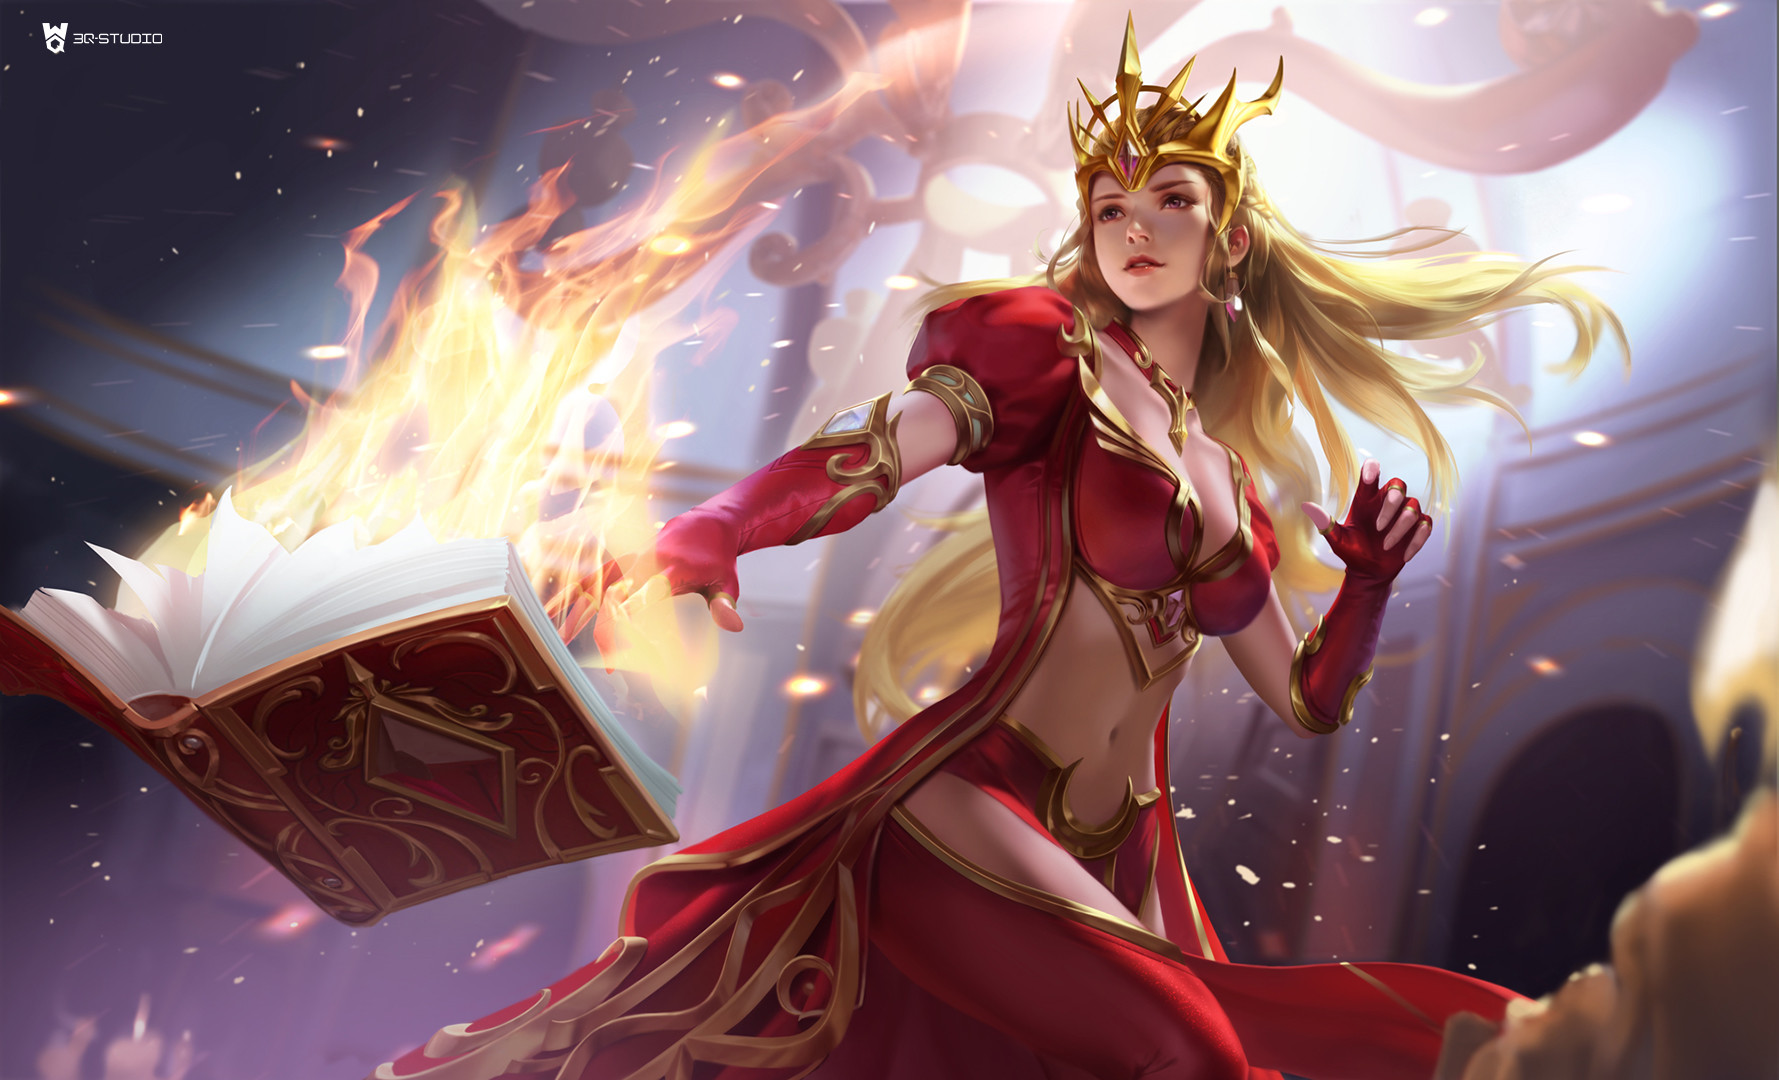 General 1779x1080 3Q Studio drawing women blonde long hair wind crown gems hair accessories dress red clothing gold magician spell fire books fantasy girl digital art watermarked